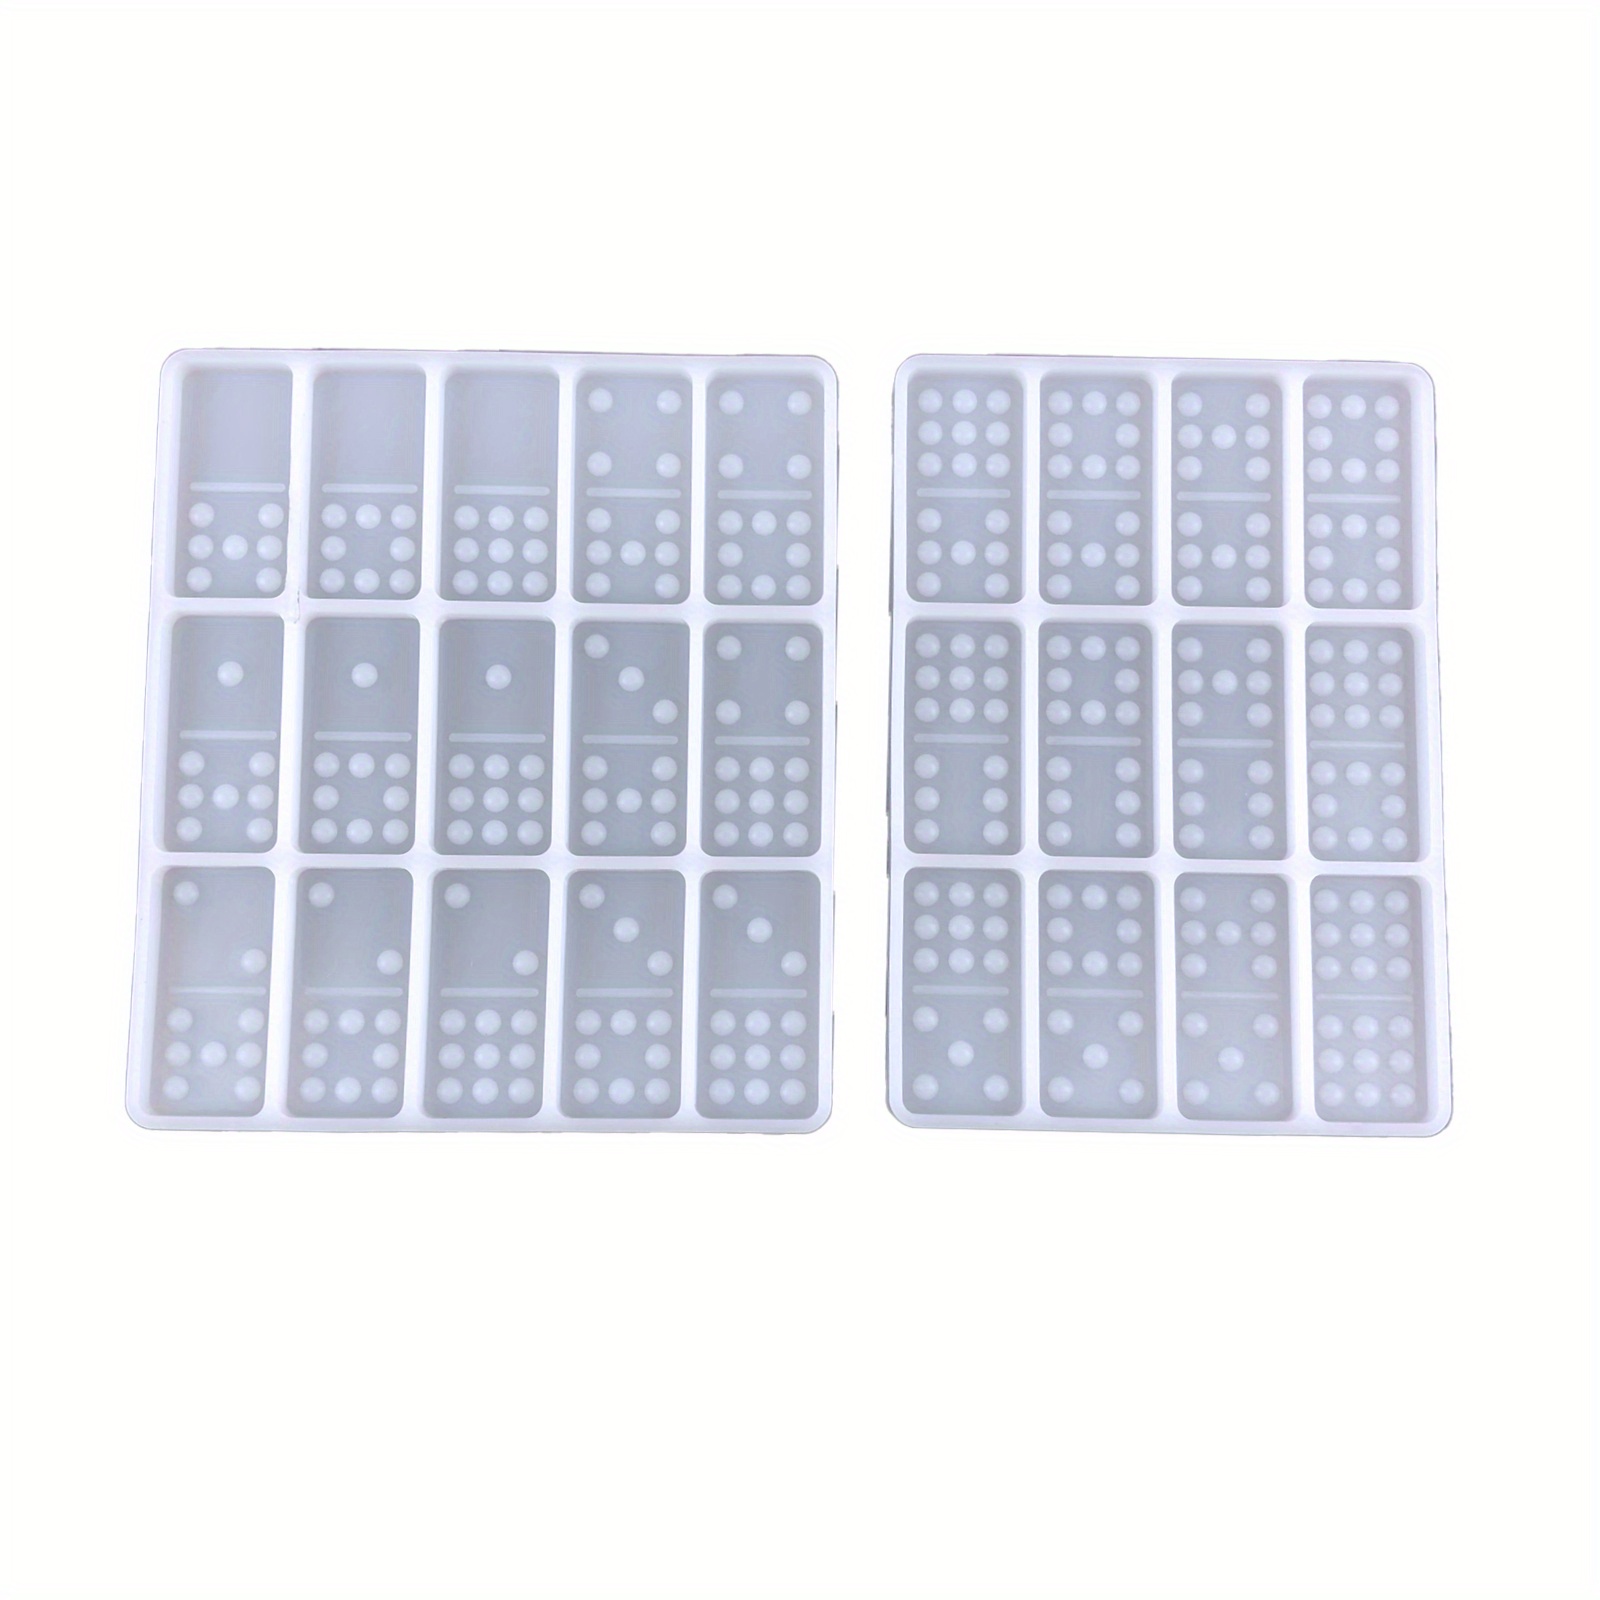 Domino Molds for Resin Casting,Resin Domino Molds Double 12 Set,Silicone  Resin Molds for DIY Personalized Dominoes,Jewelry Pendant,Table Board Game